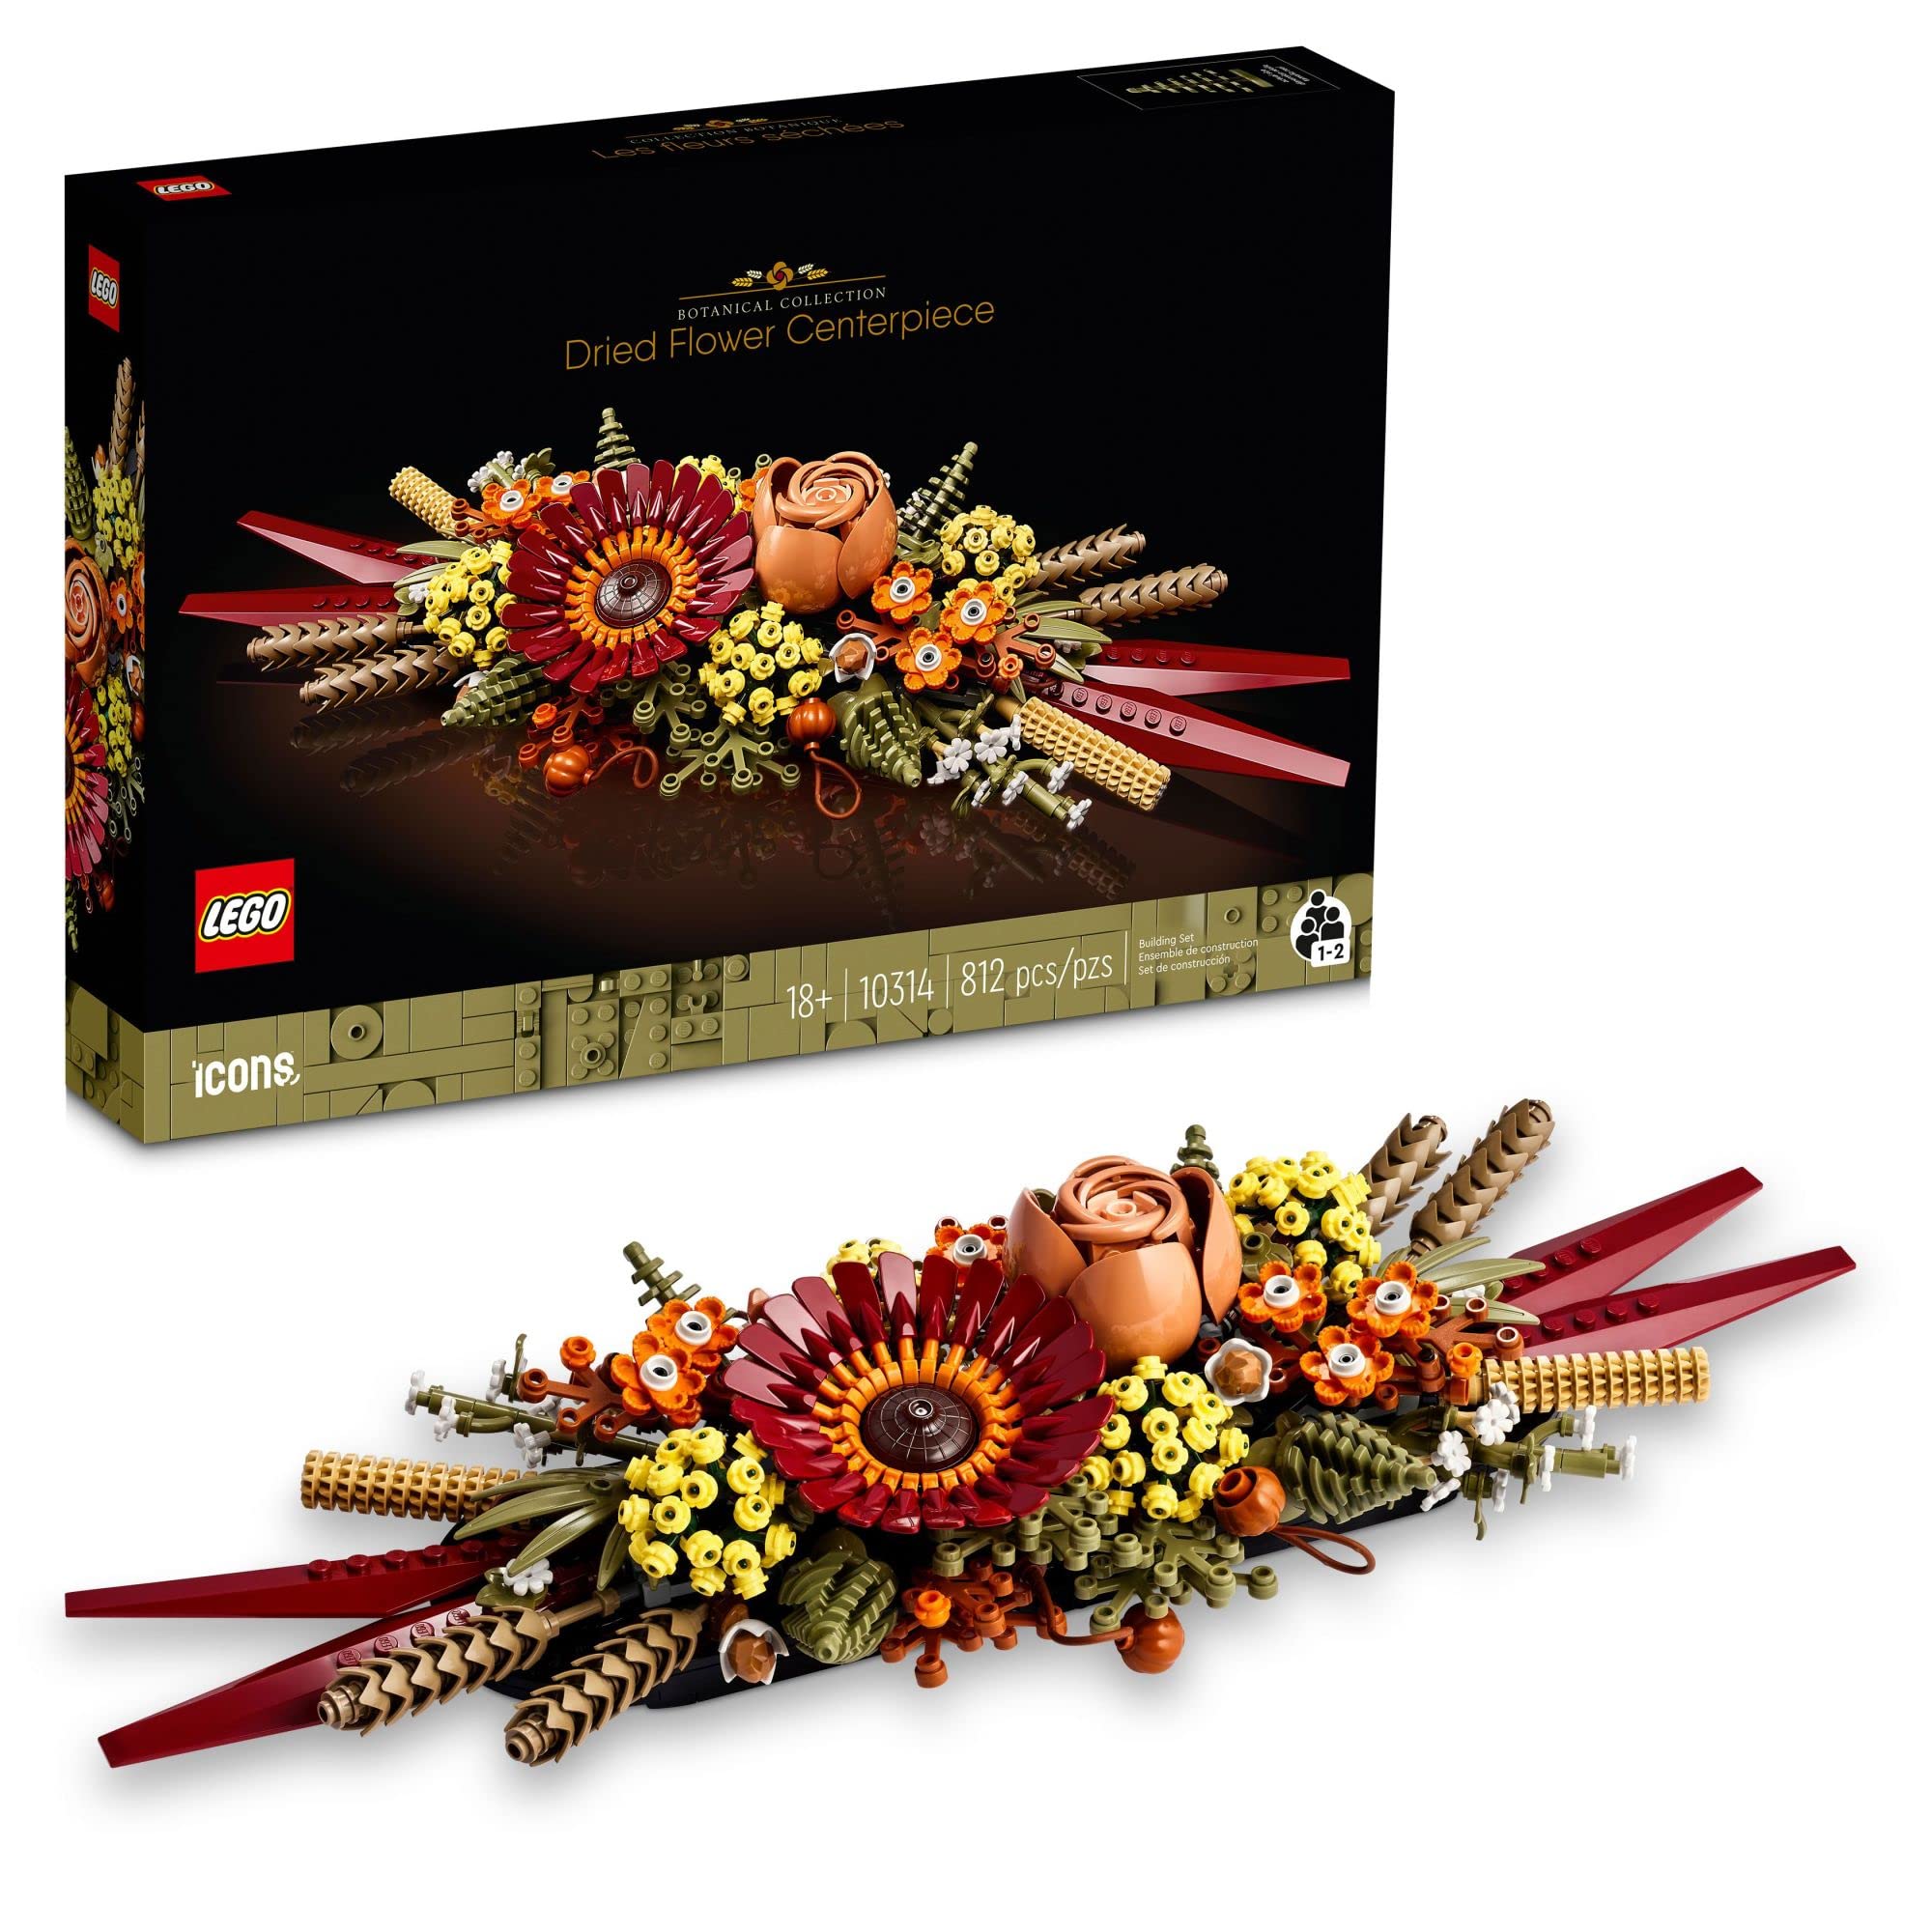 $42.99: LEGO Icons Dried Flower Centerpiece 10314 Botanical Collection Crafts Set